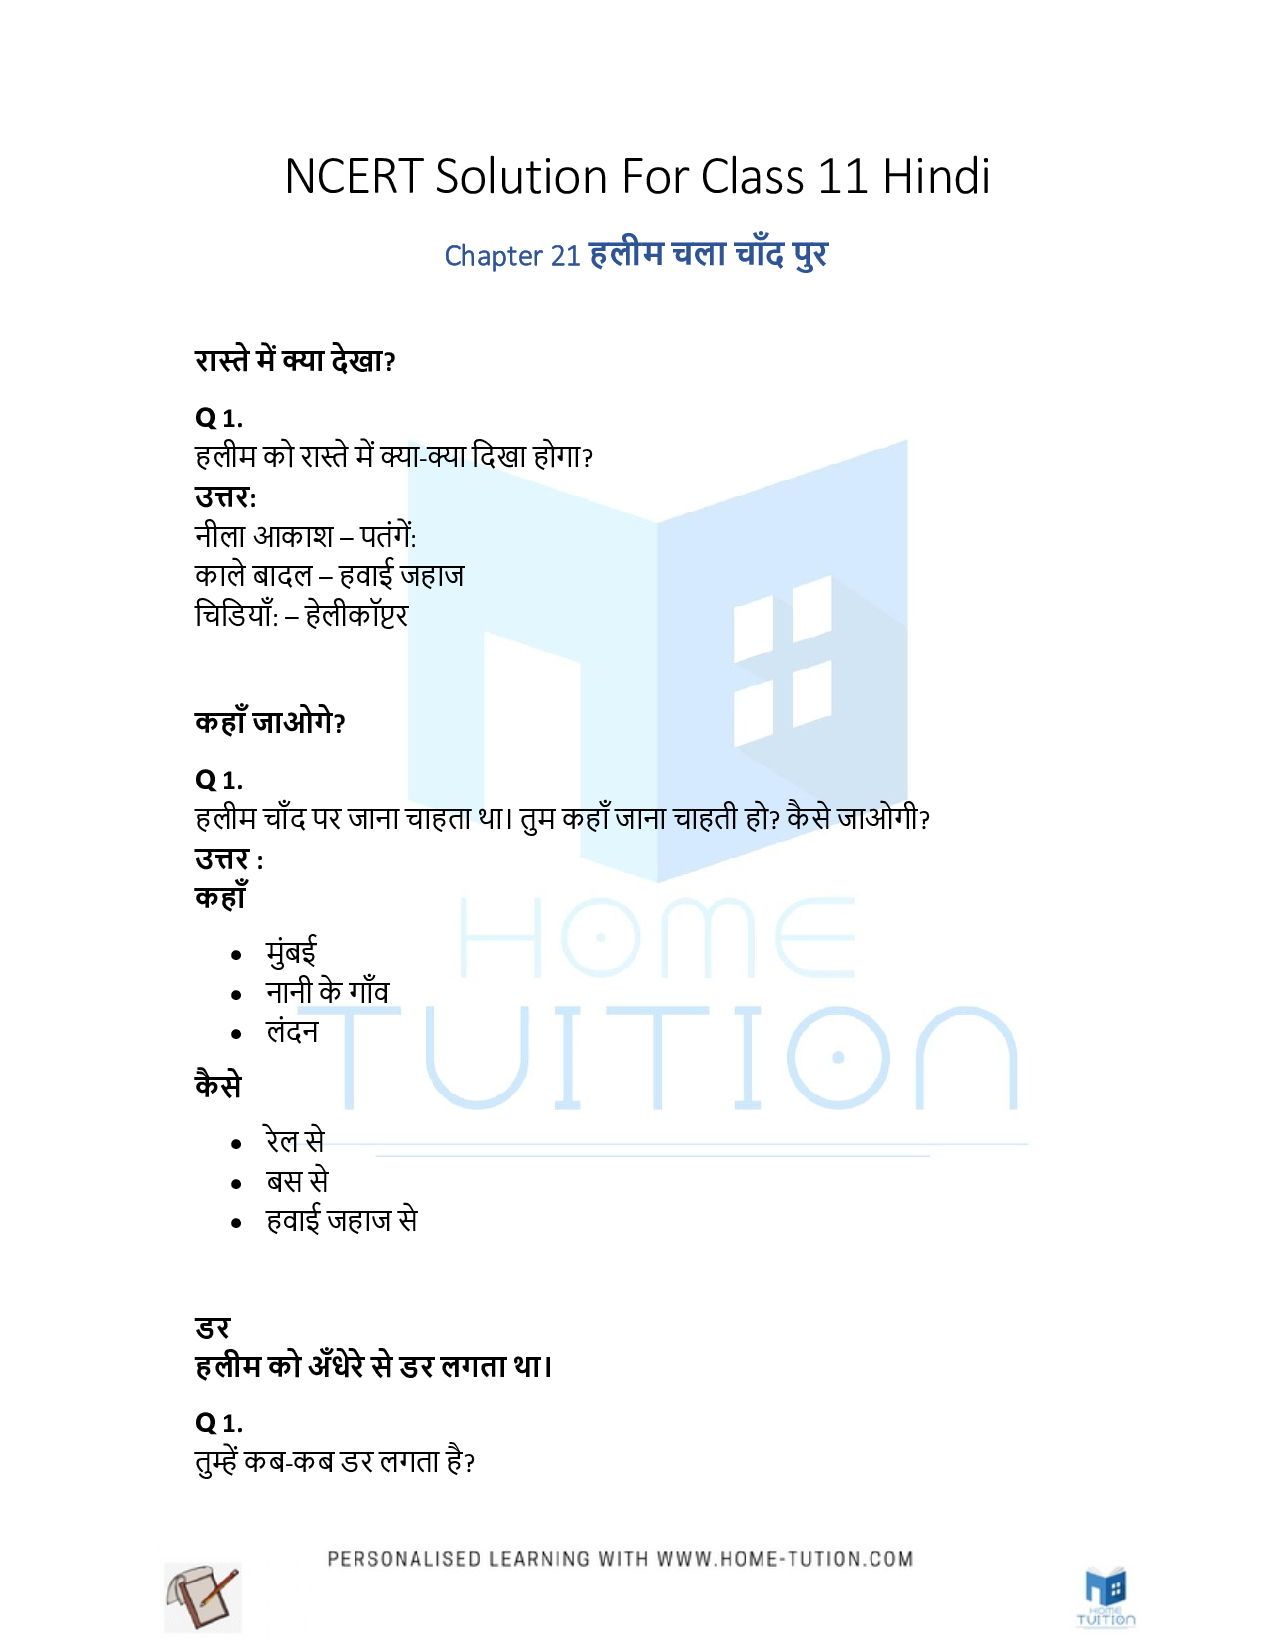 NCERT Solution for Class 1 Hindi Chapter 21 Halim Chala Chand Par (हलीम-चला-चाँद-पर)